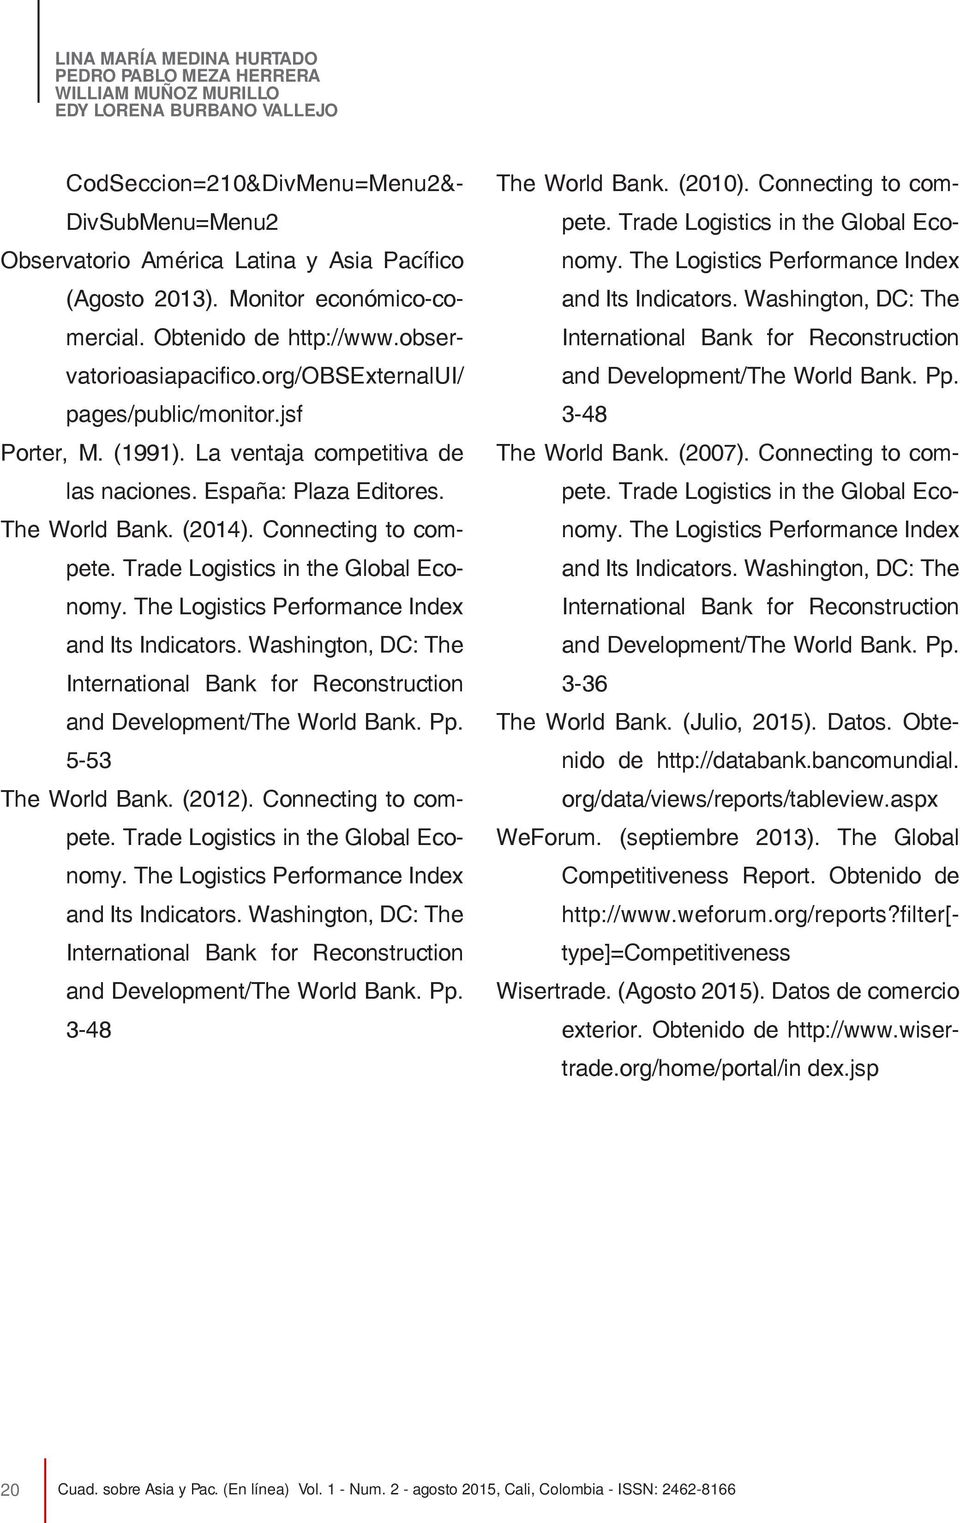 España: Plaza Editores. The World Bank. (2014). Connecting to compete. Trade Logistics in the Global Economy. The Logistics Performance Index and Its Indicators.